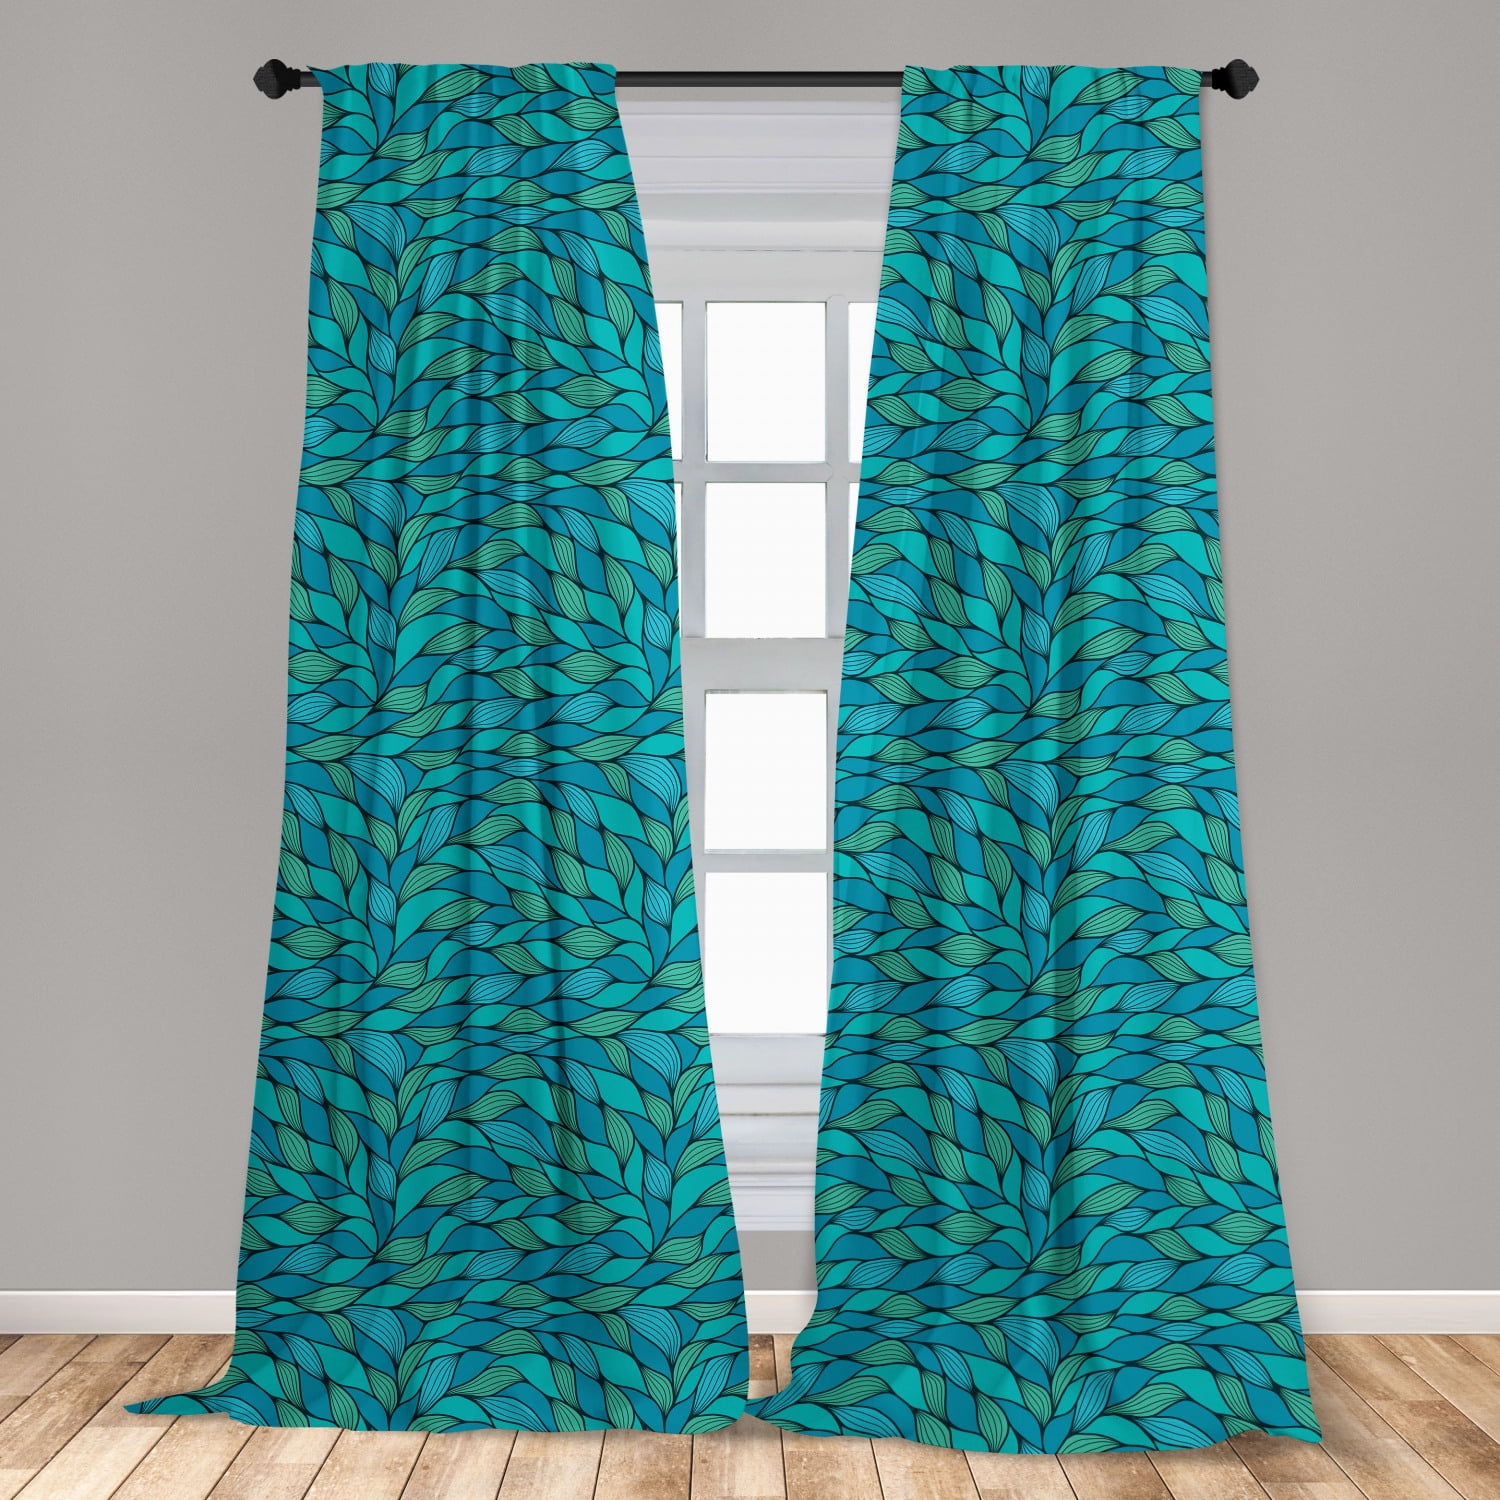 Multiple Sized Sea Waves Wavy Lines Floral Artwor Sea Theme Printed Curtain  Drapes For Living Room Dining Room Bed Room With 2 Panel Set